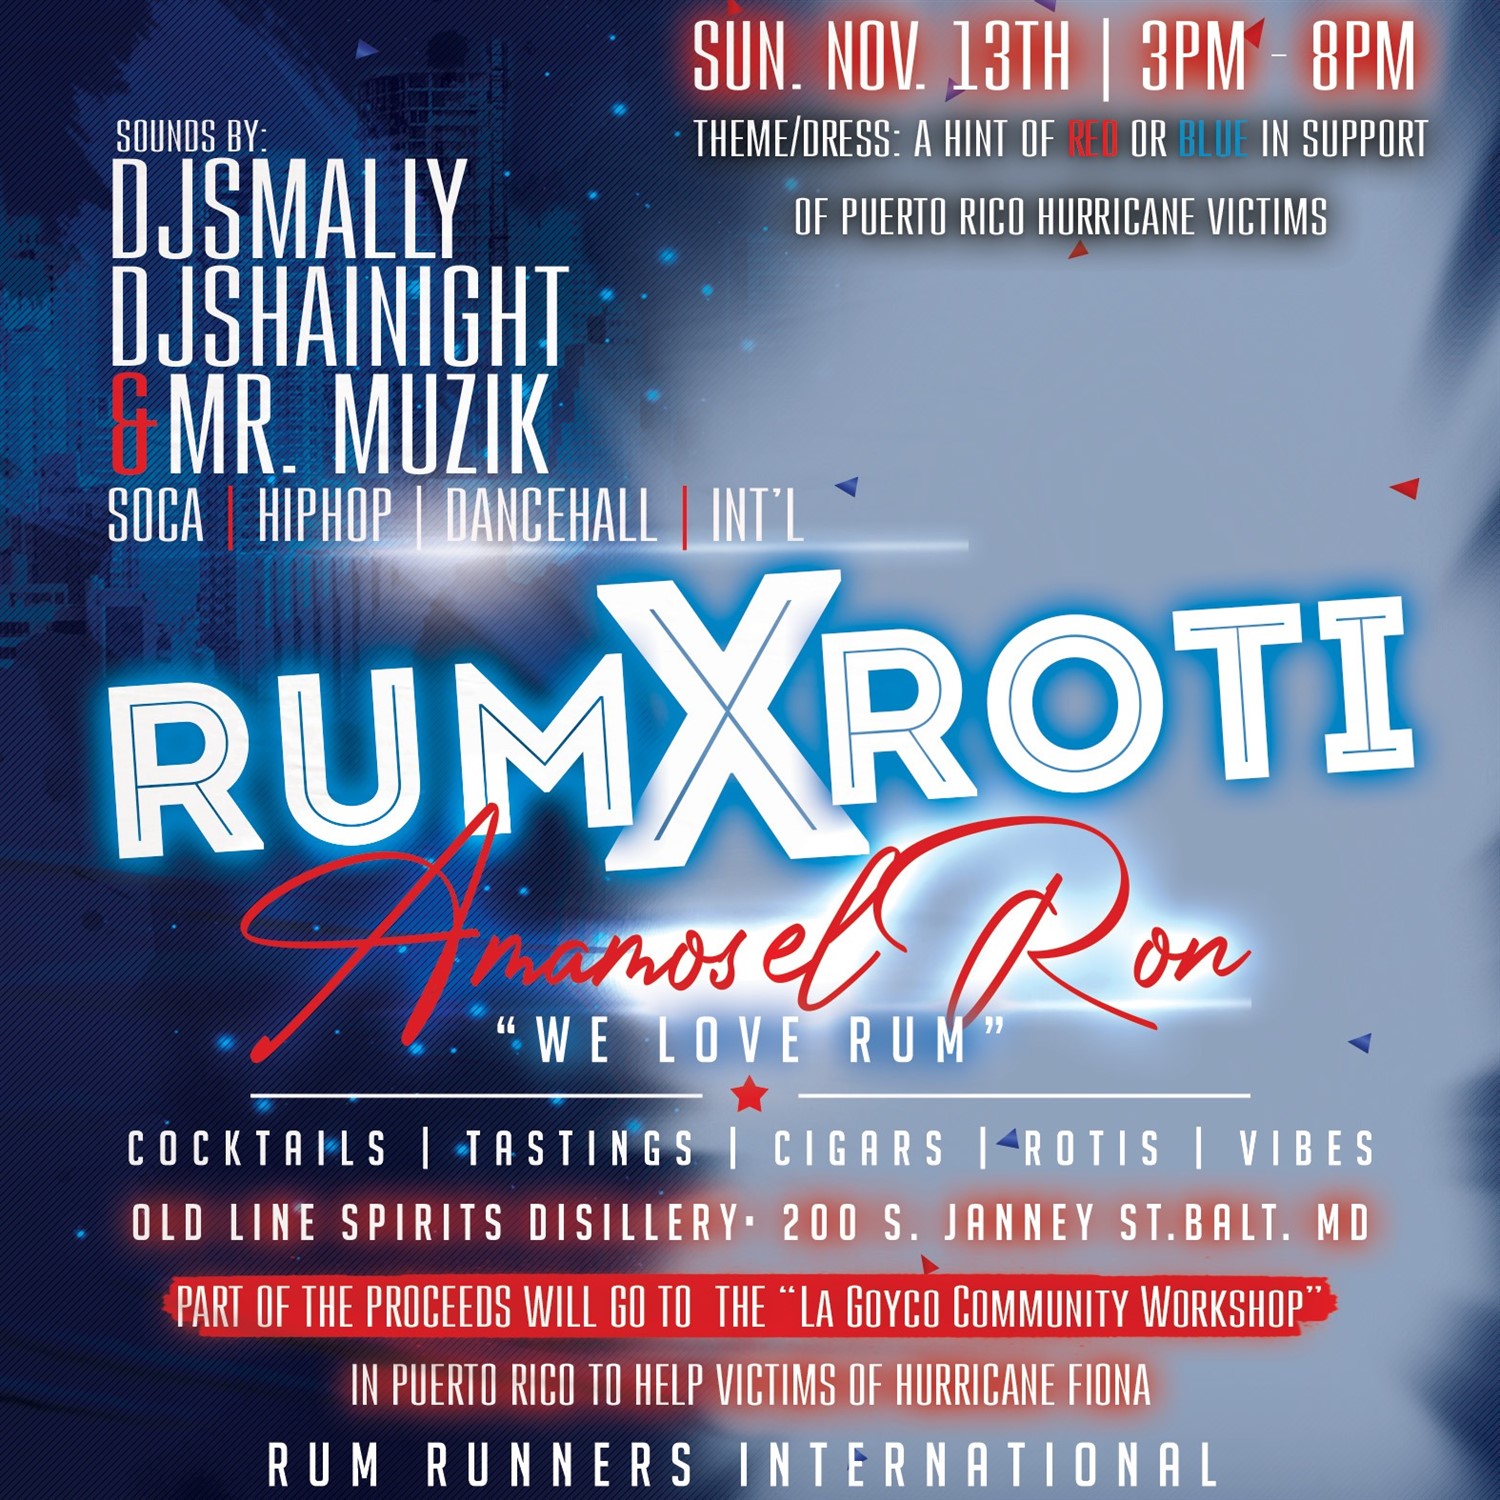 Rum x Roti  on Nov 13, 15:00@Old Line Spirits Distillery - Buy tickets and Get information on www.fetefinders.com tickets.fetefinders.com